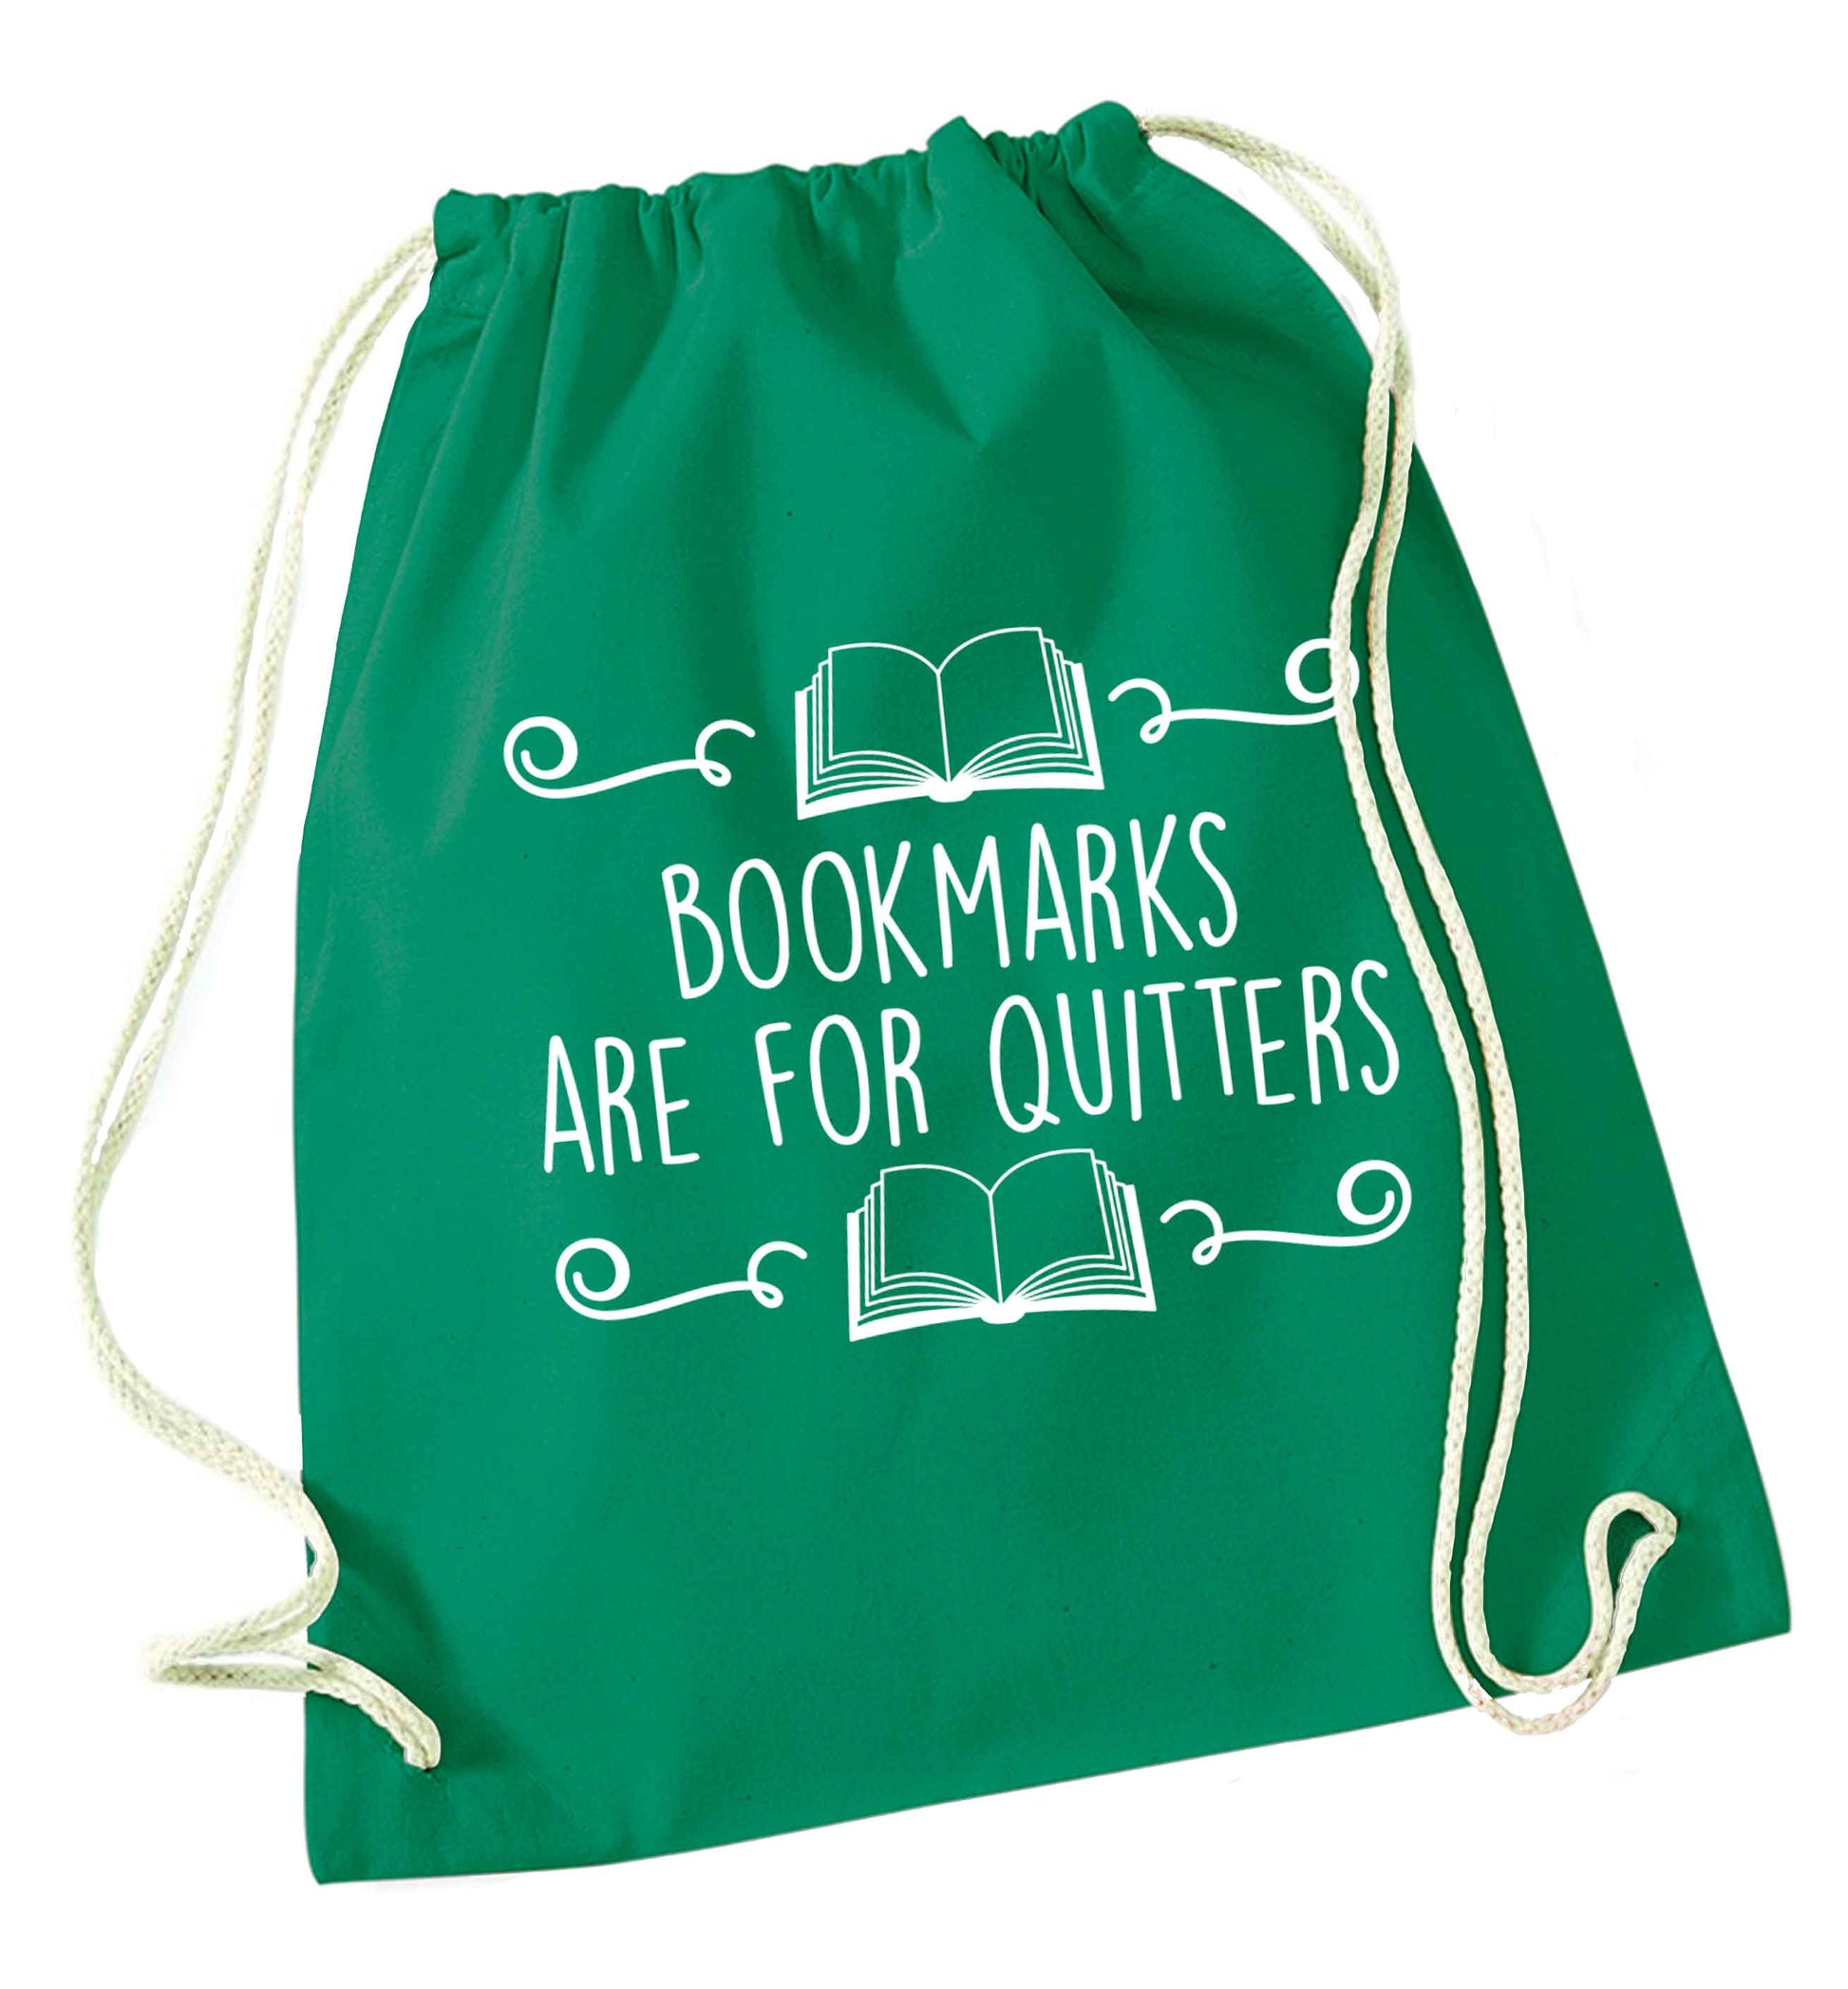 Bookmarks are for quitters green drawstring bag